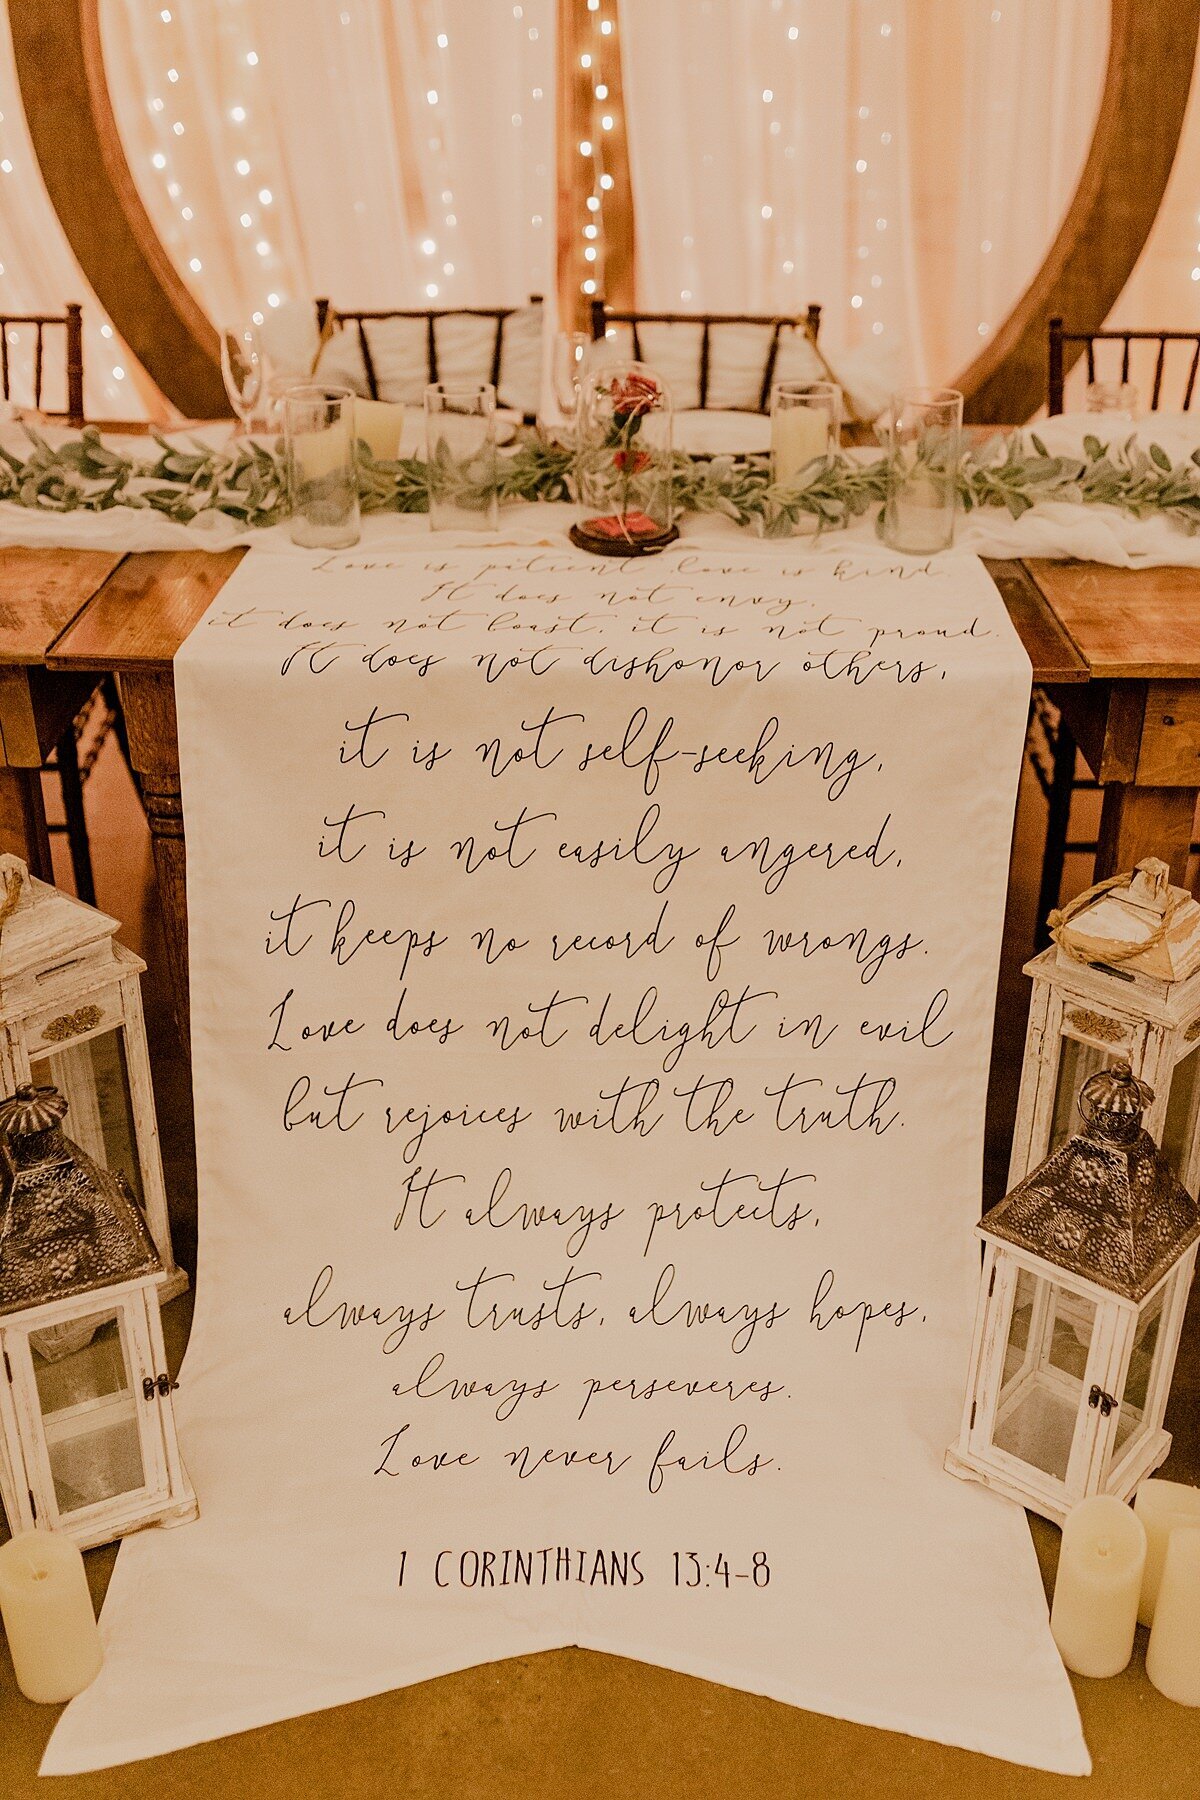 A banner with 1 Corinthians 13.4-8 decorates a sweetheart table at Grace Valley Farm. On either side of the banner are two sets of white lanterns with pillar candles. The farm house tables are decorated with white organza table runners with a lambs ear garland and clear glass cylinders with white pillar candles. Behind the table is a dark wood round arbor with sheer drapery and twinkle lights.